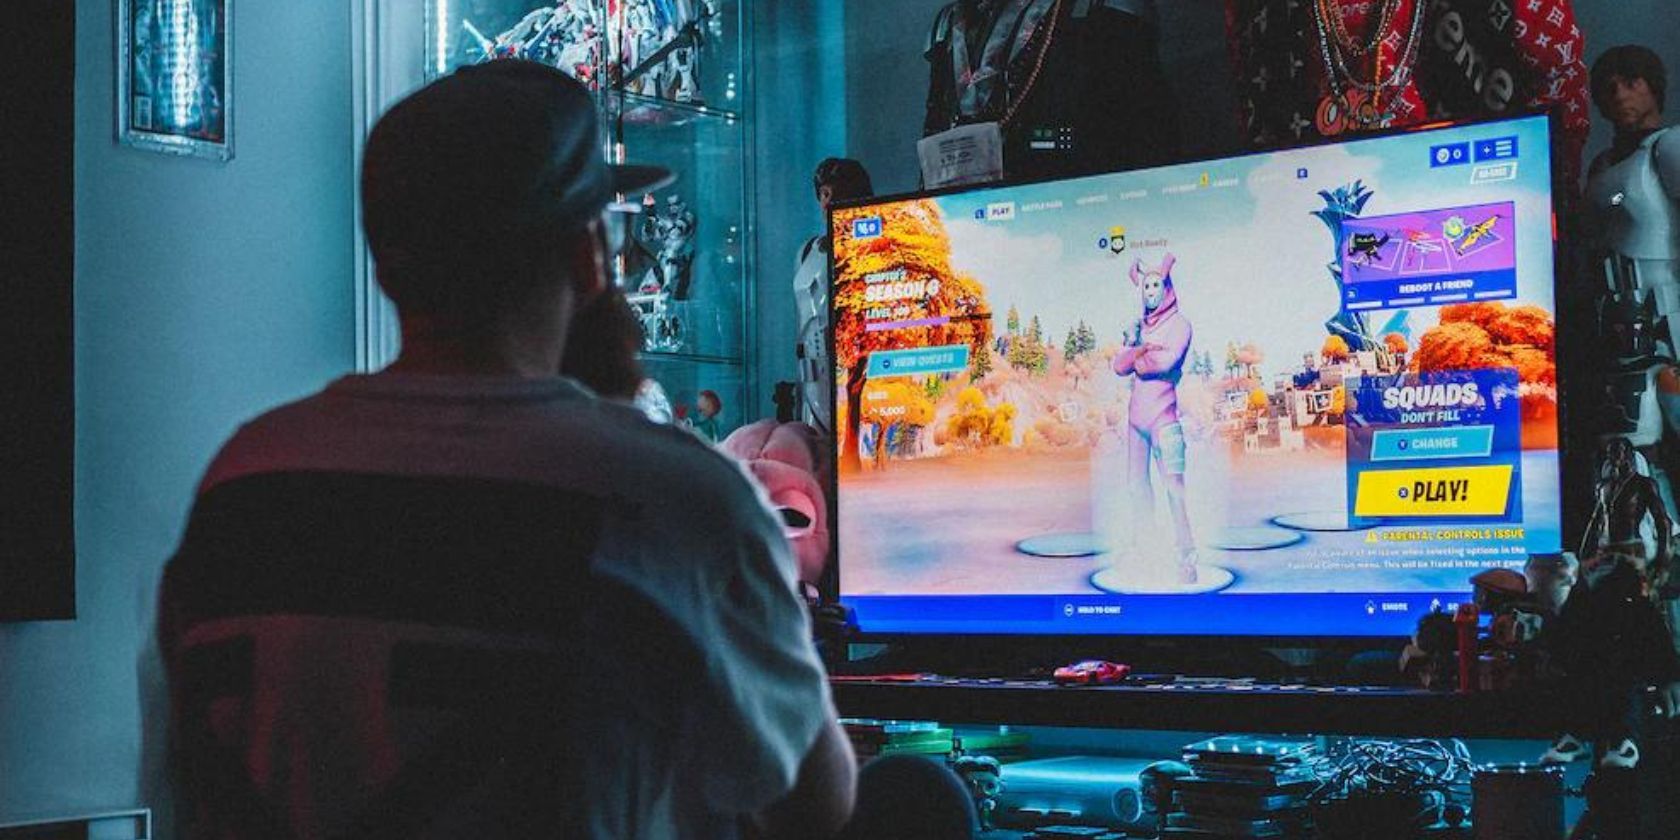 Man playing Fortnite in the game room